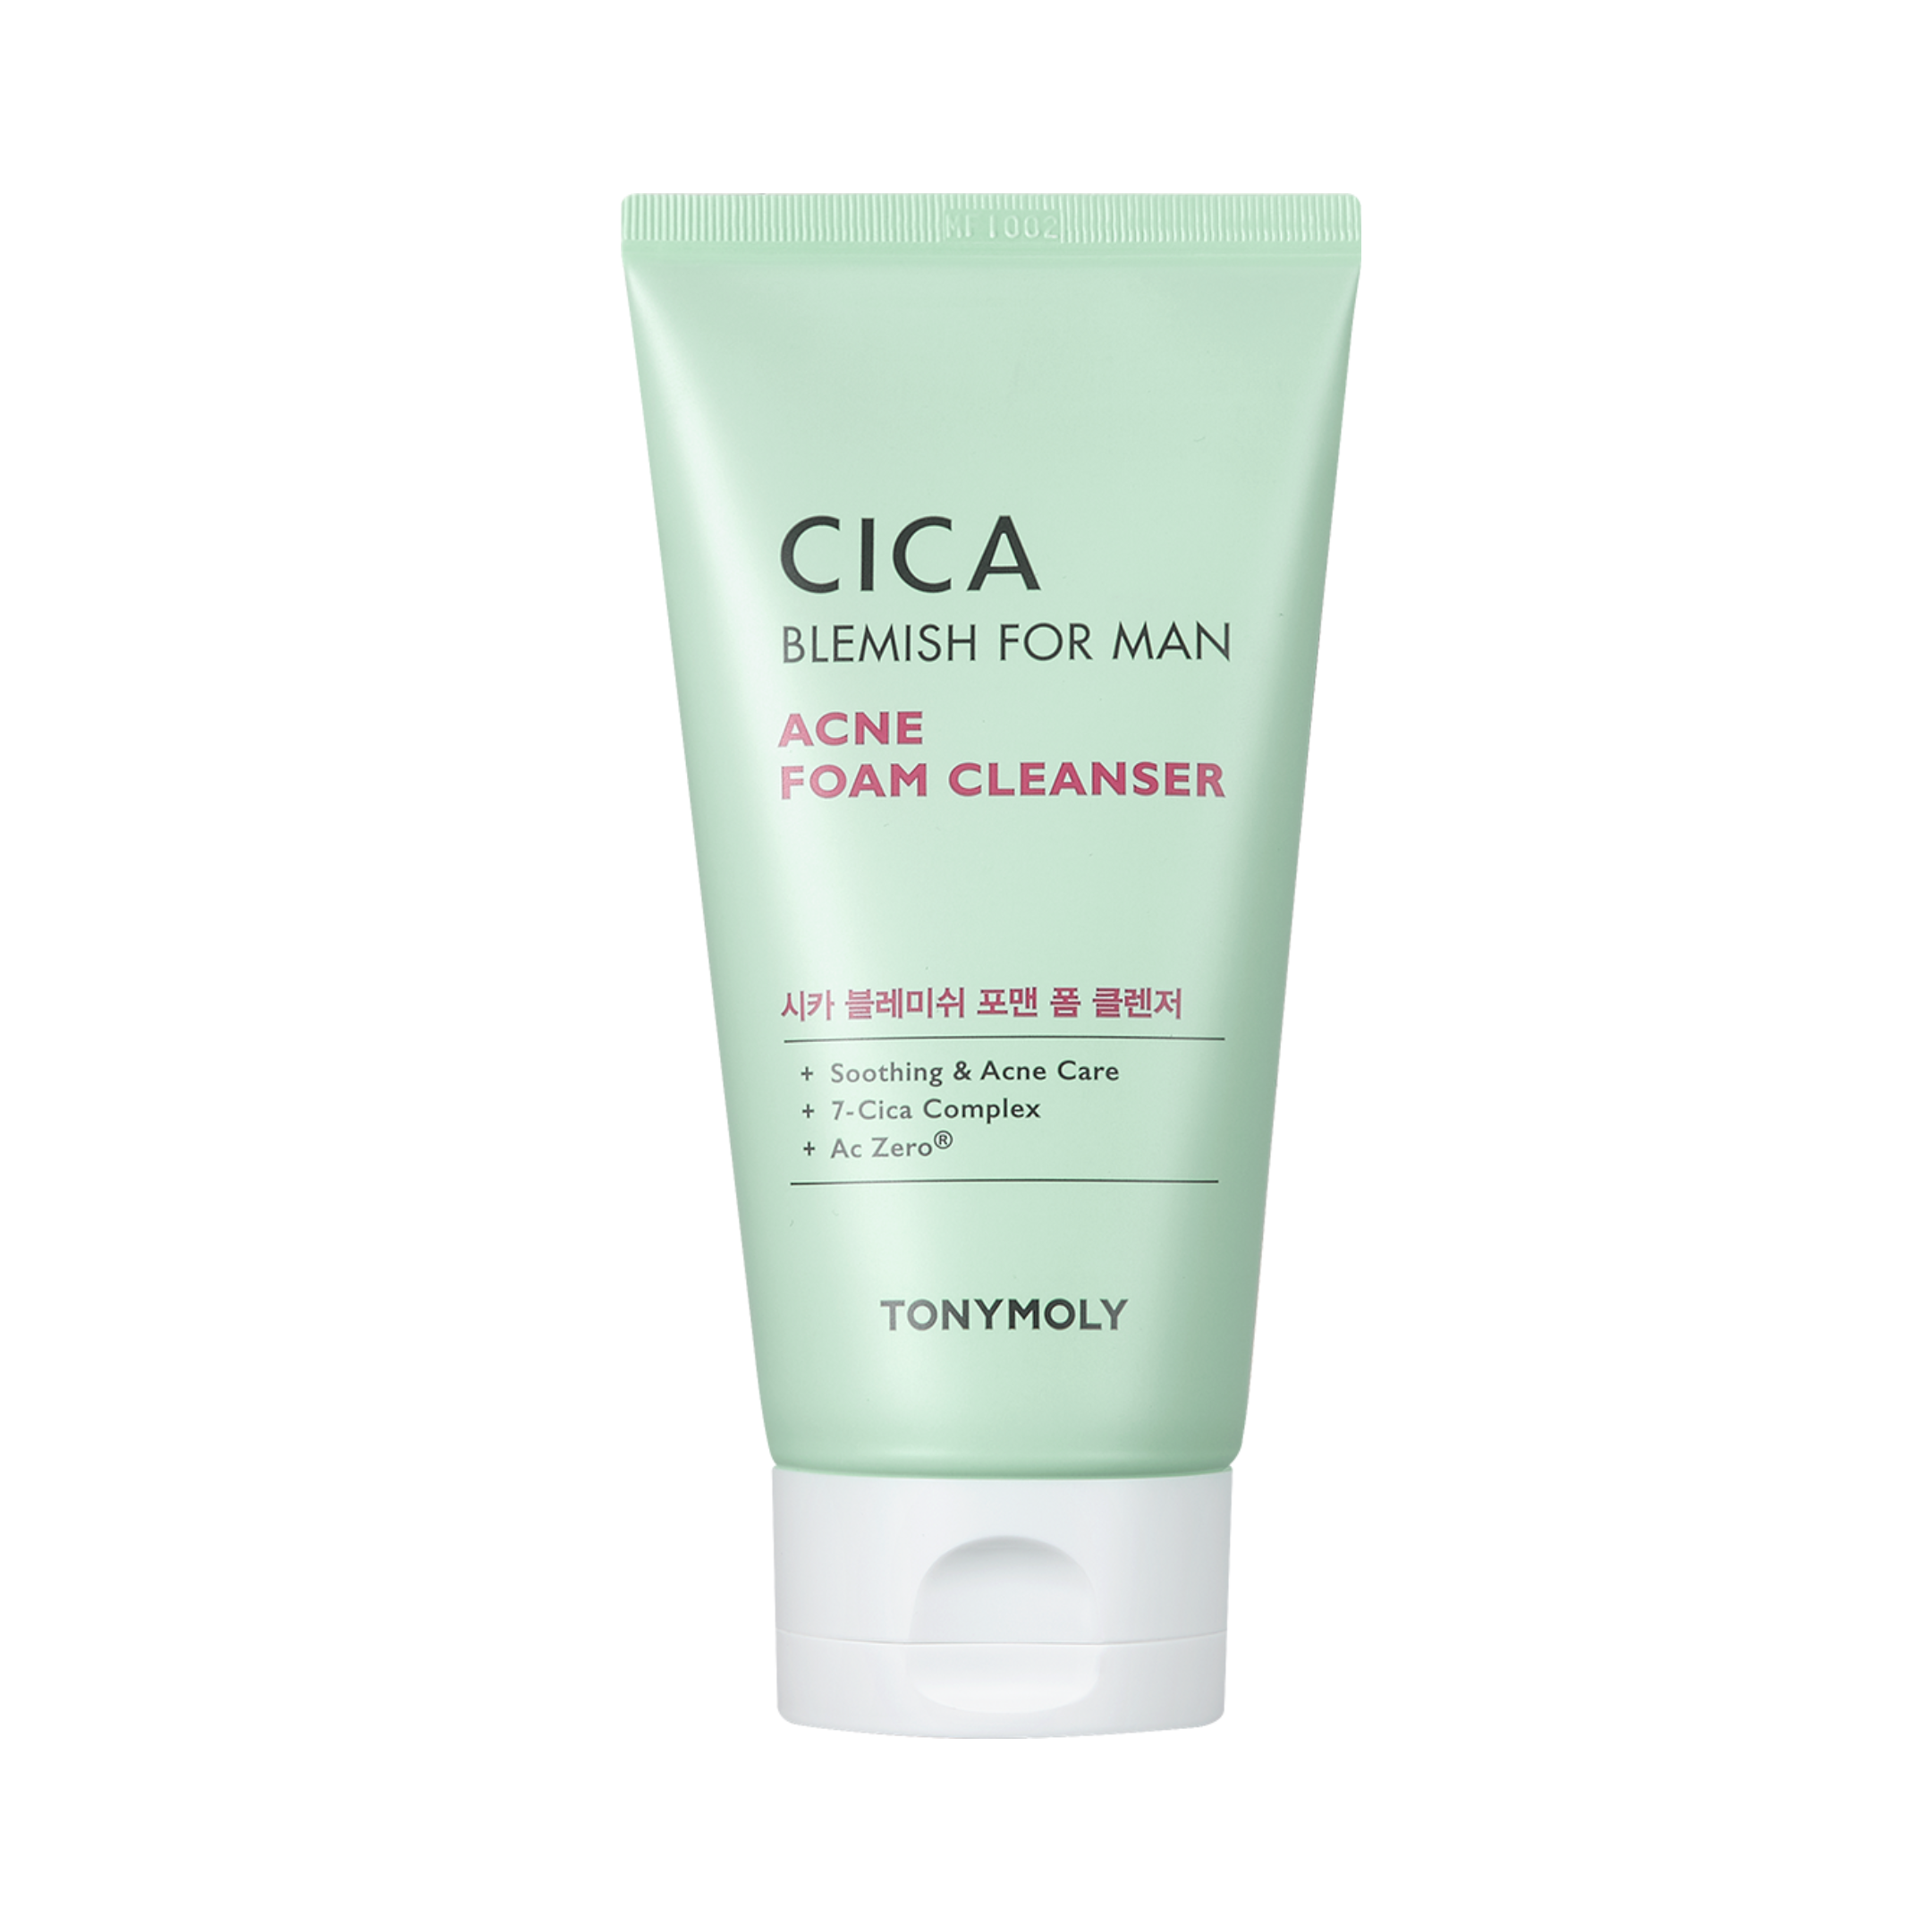 CICA Blemish For Man Acne Foam Cleanser